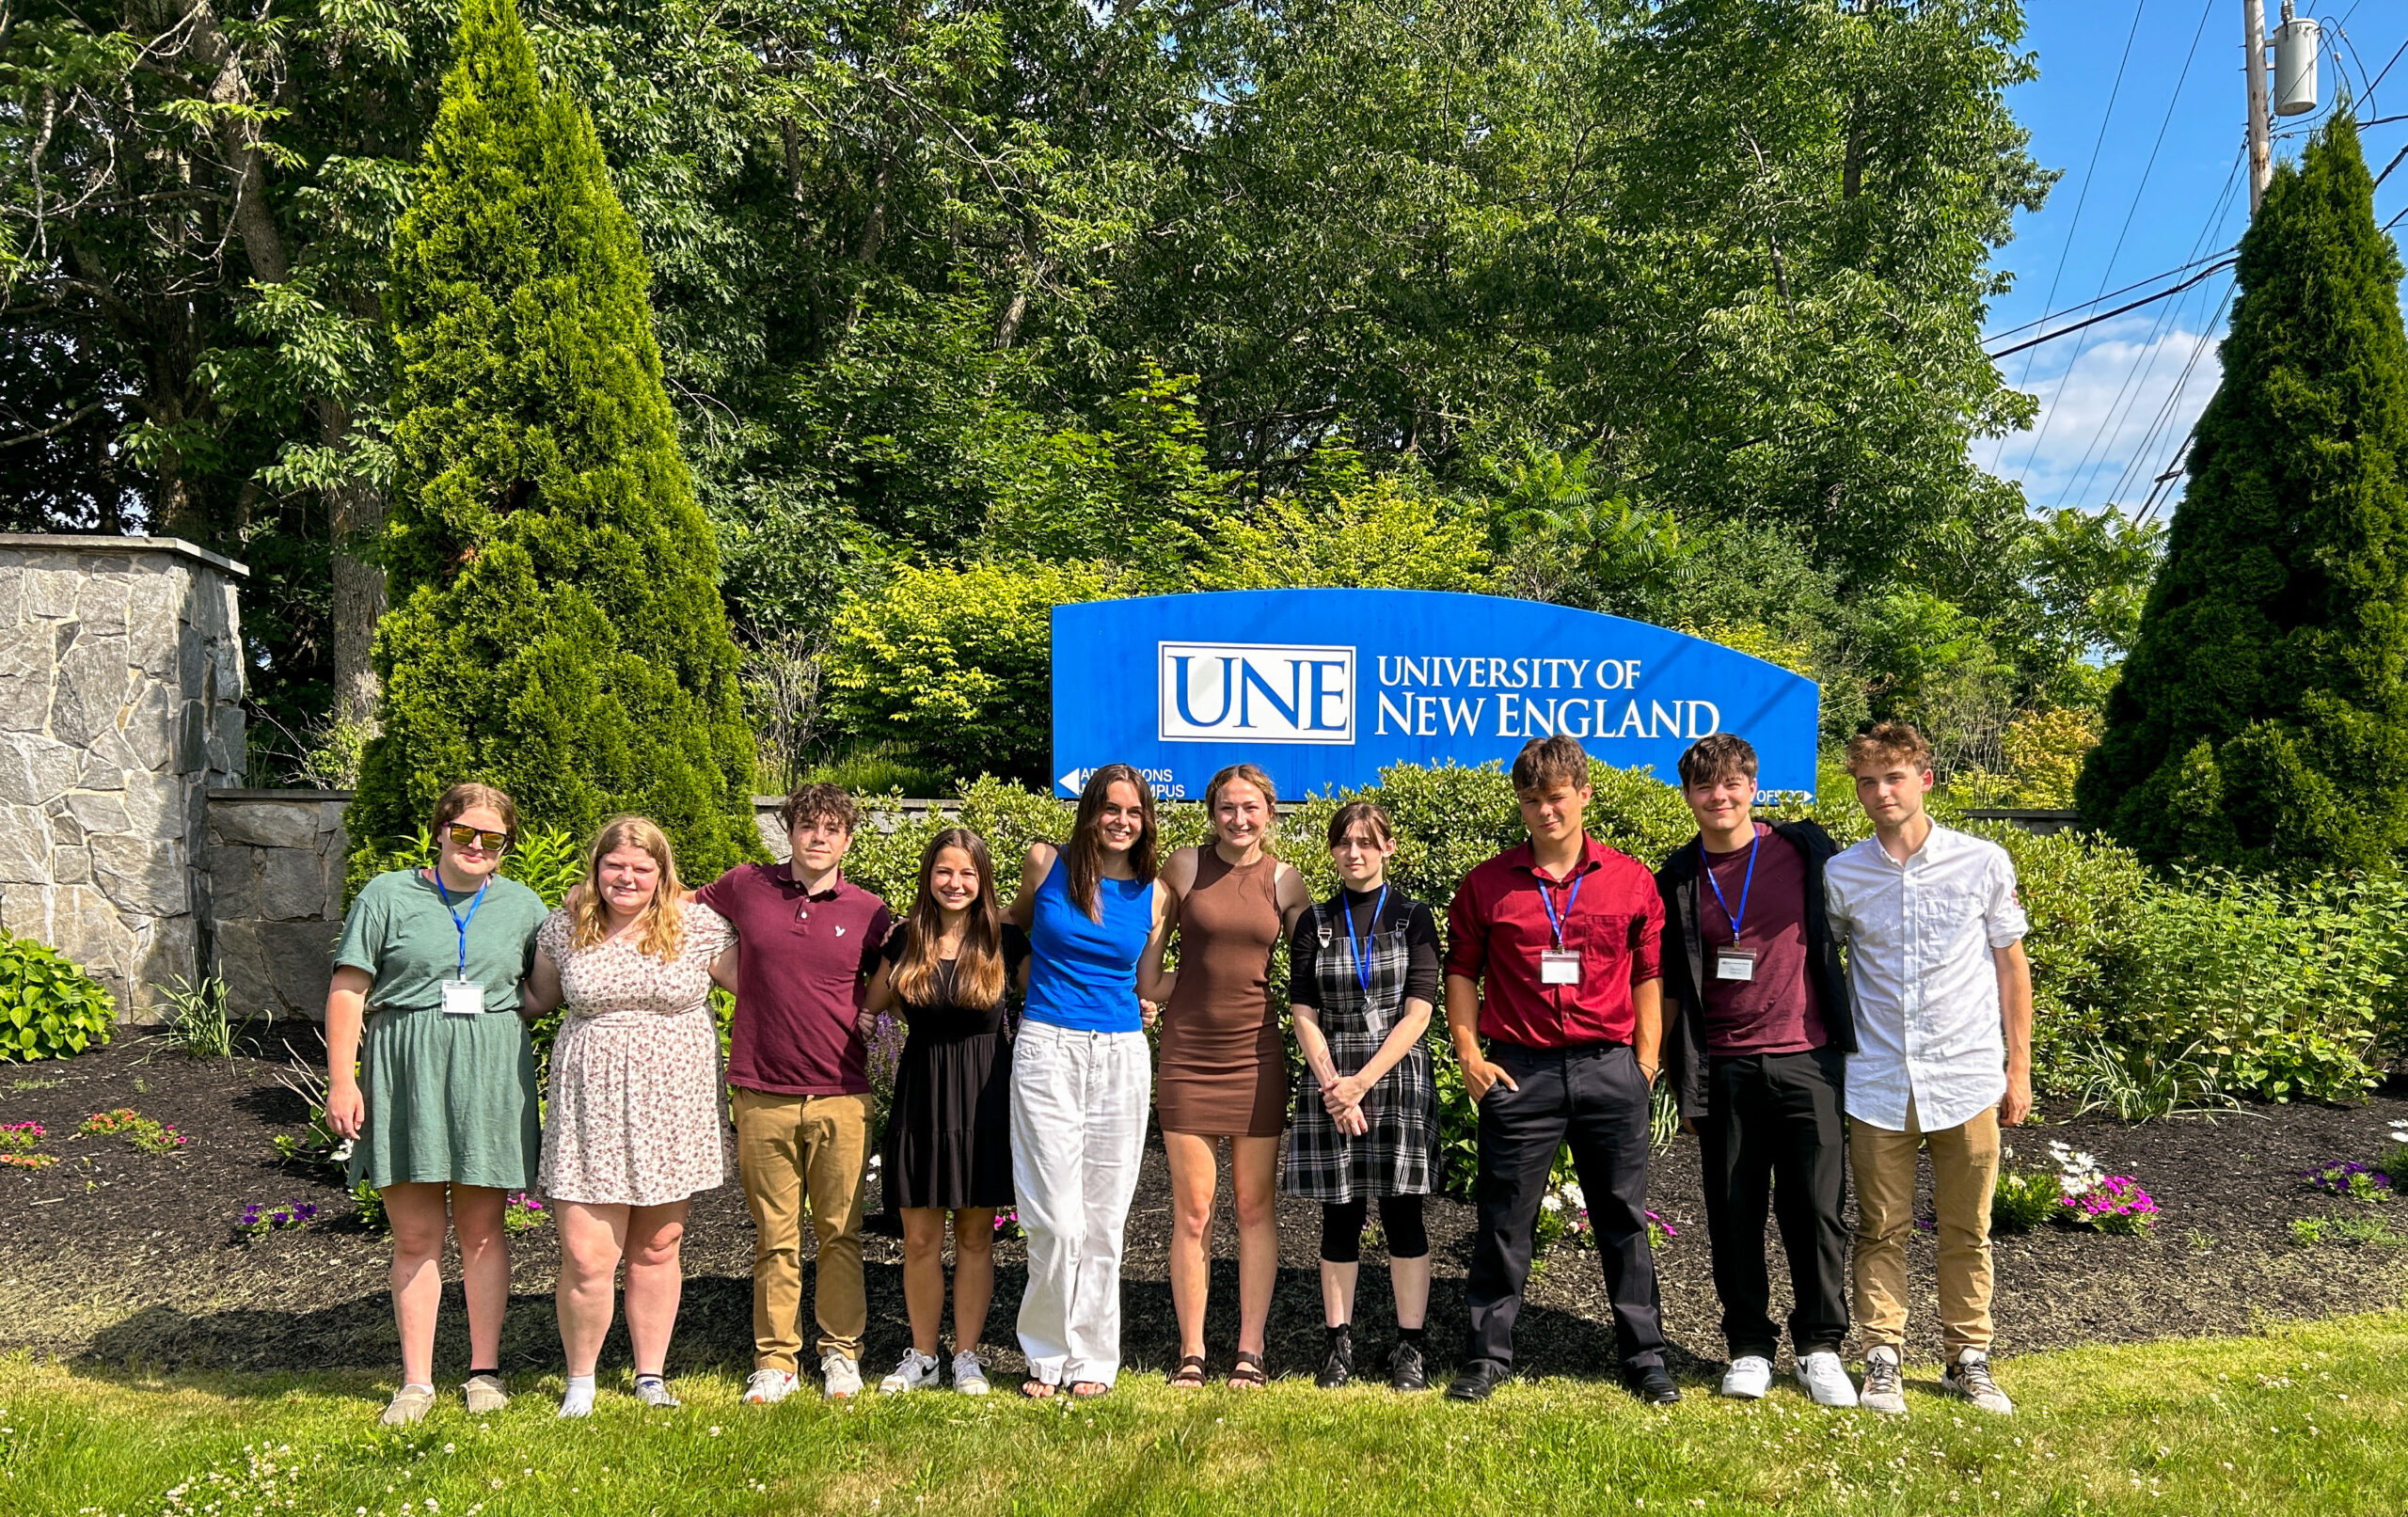 A group of smiling teenagers stand in front of a sign that reads "UNE University of New England"